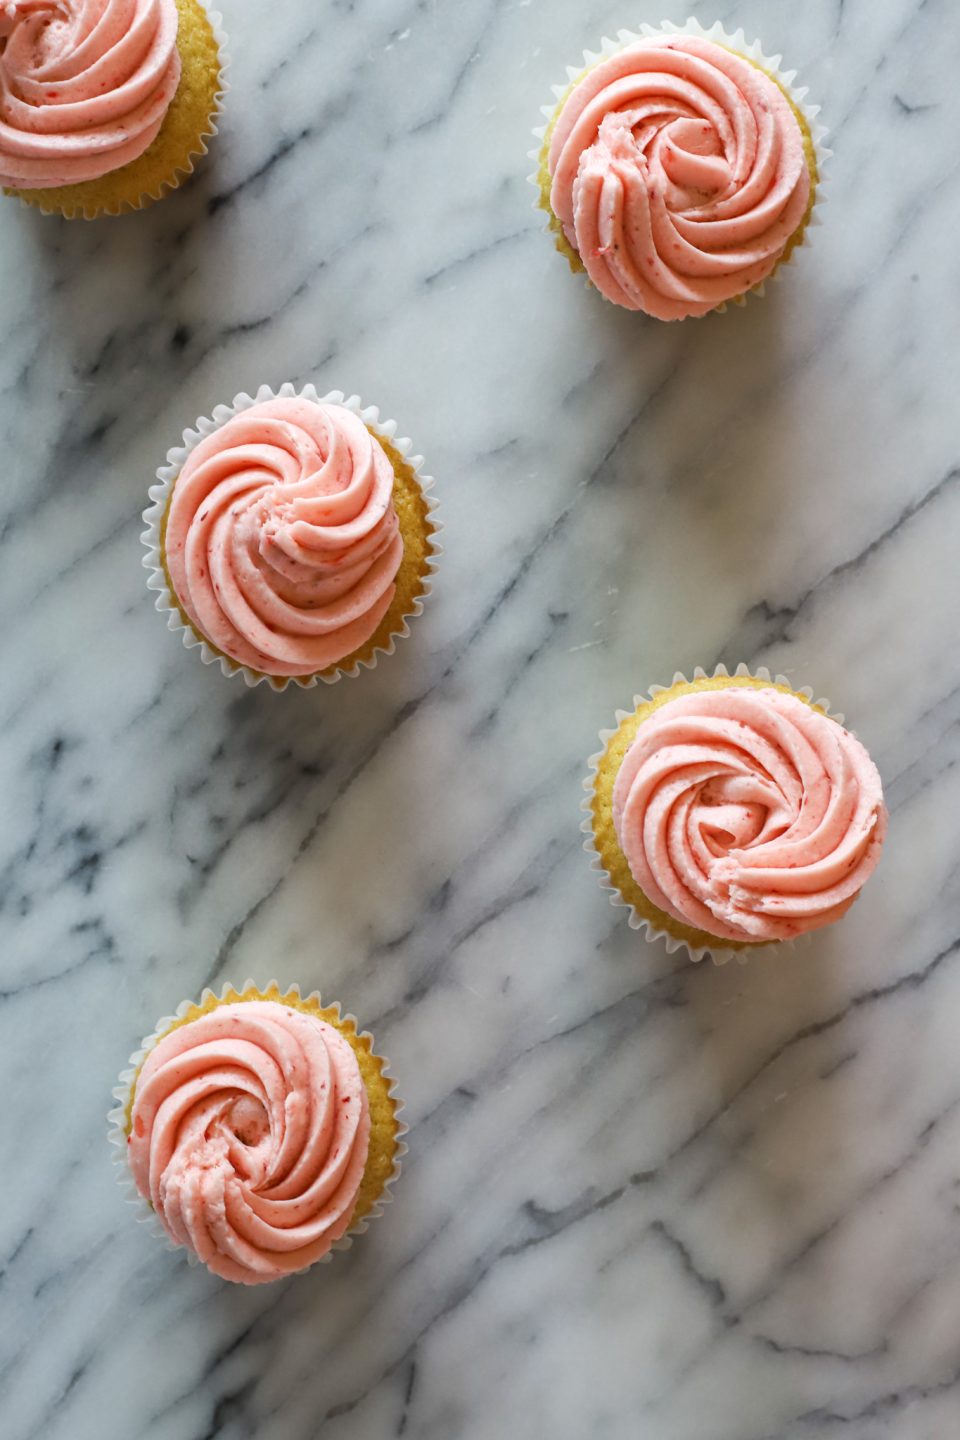 Vanilla Strawberry-Filled Cupcakes with Strawberry Buttercream Icing